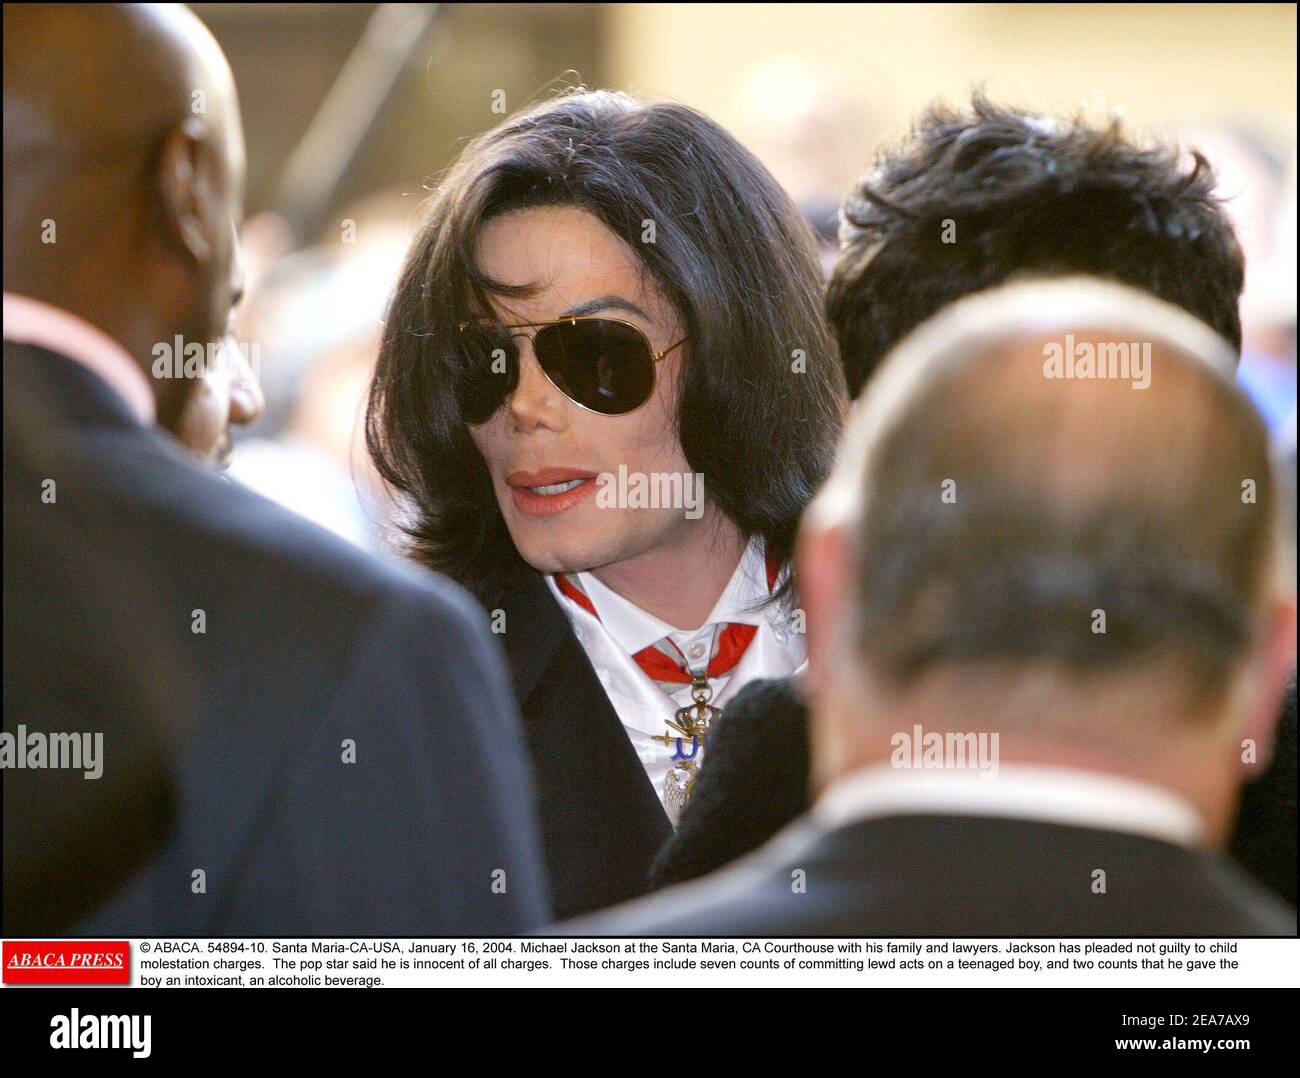 © ABACA. 54894-10. Santa Maria-CA-USA, January 16, 2004. Michael Jackson at the Santa Maria, CA Courthouse with his family and lawyers. Jackson has pleaded not guilty to child molestation charges. The pop star said he is innocent of all charges. Those charges include seven counts of committing lewd acts on a teenaged boy, and two counts that he gave the boy an intoxicant, an alcoholic beverage. Stock Photo